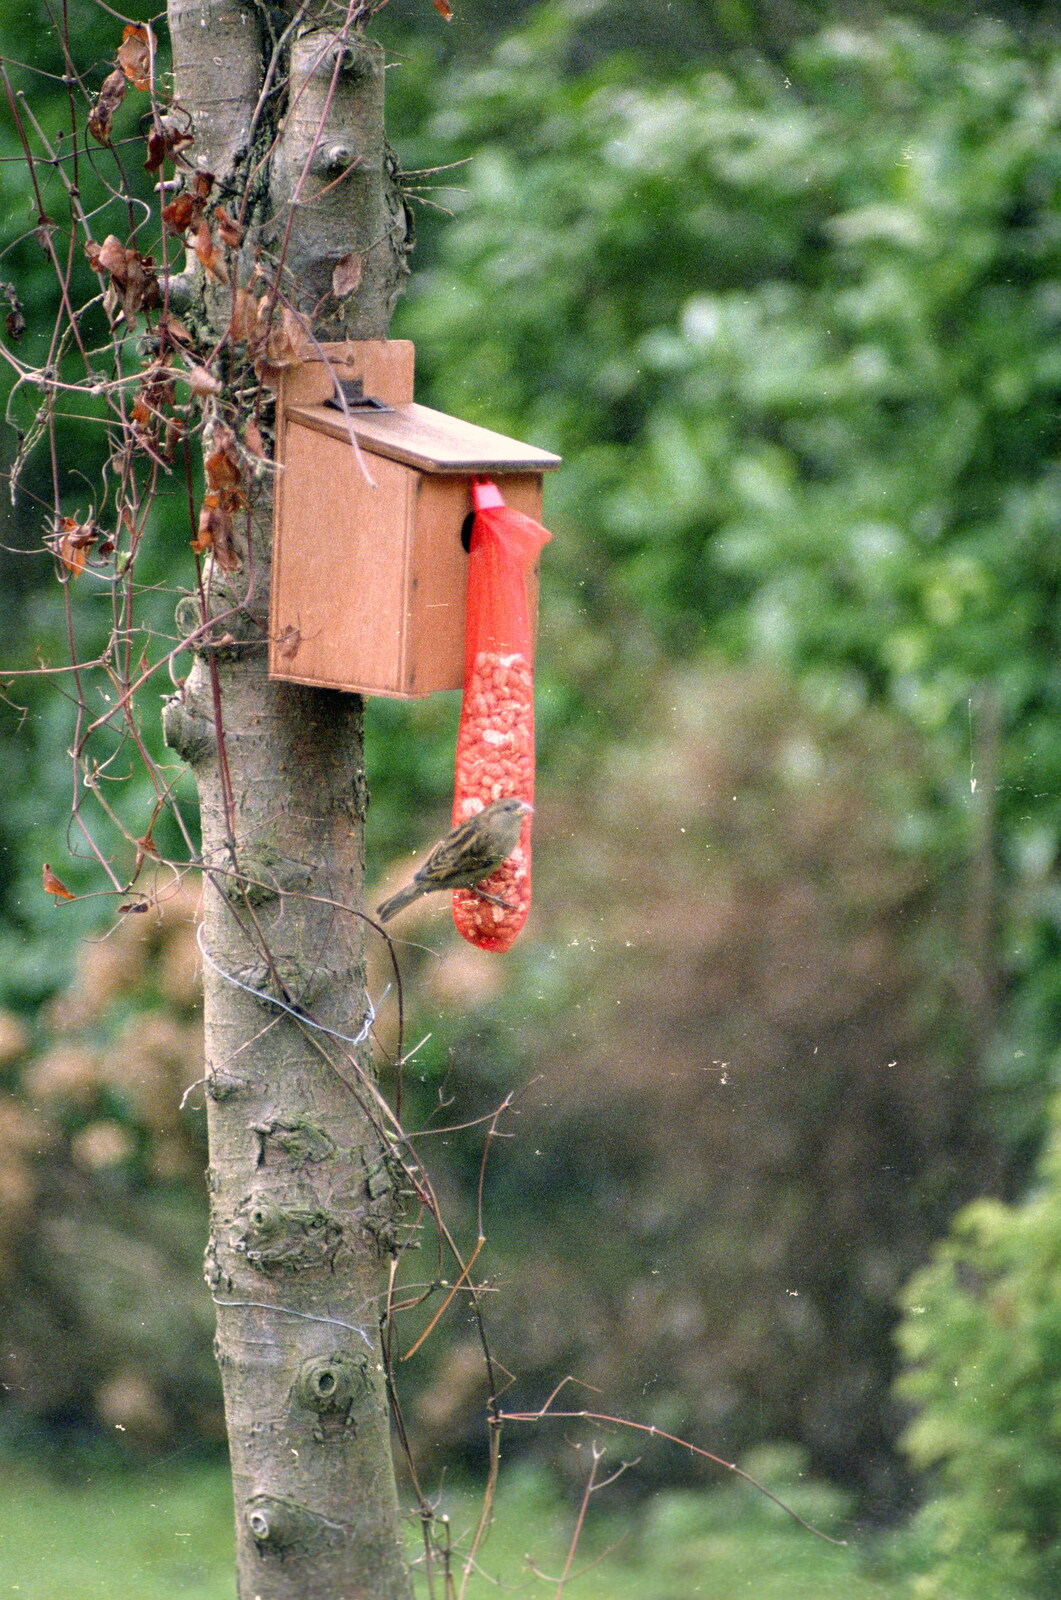 A sparrow on the bird feeder from Christmas in Macclesfield and Wetherby, Cheshire  and Yorkshire - 25th December 1985